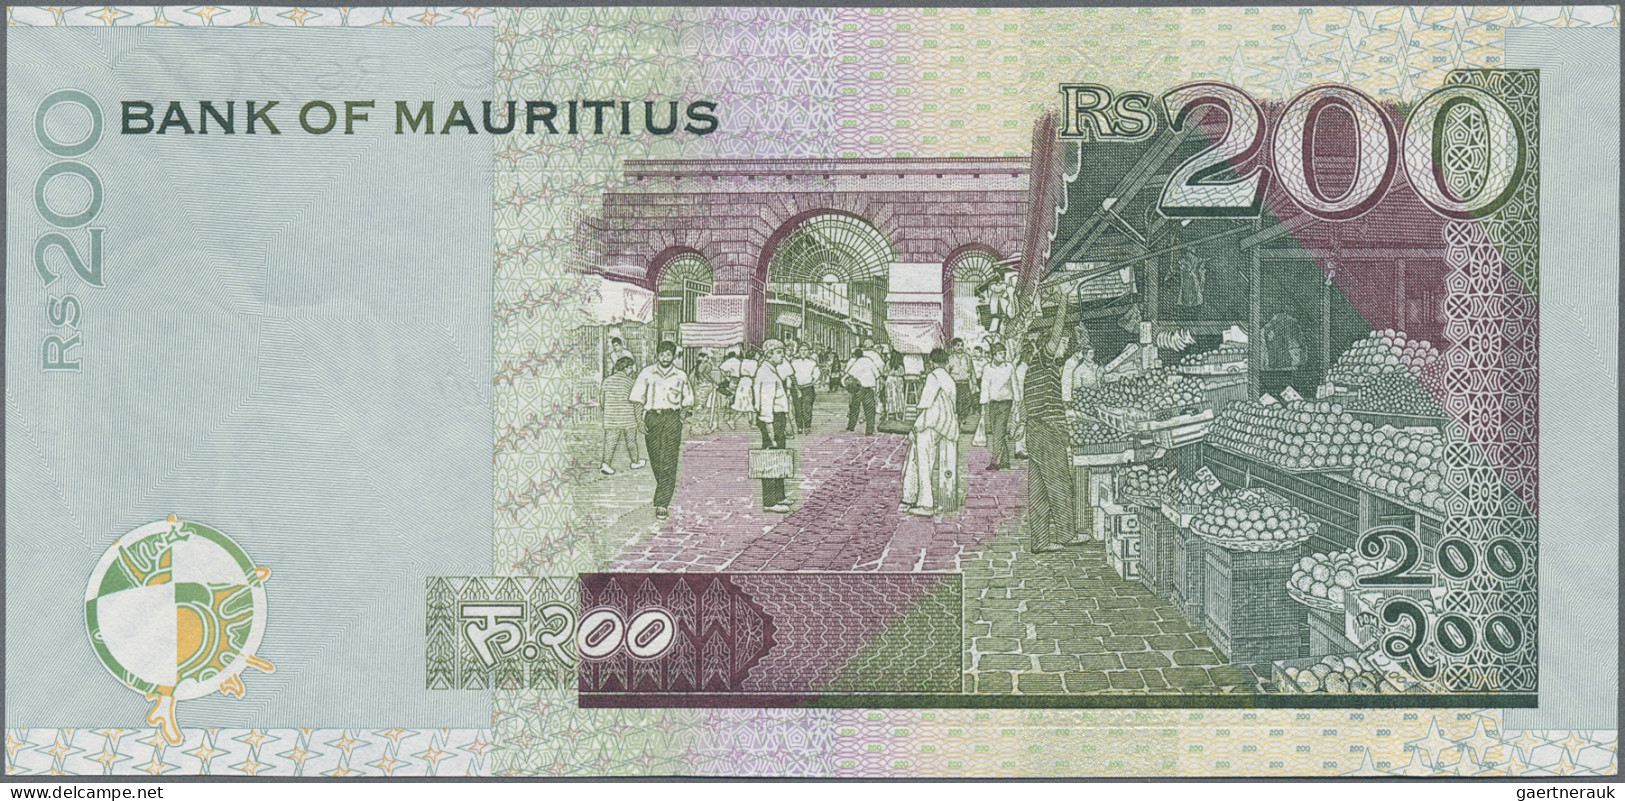 Mauritius: Bank Of Mauritius, Lot With 5 Banknotes, 2001 And 2007 Series, With 1 - Mauritius